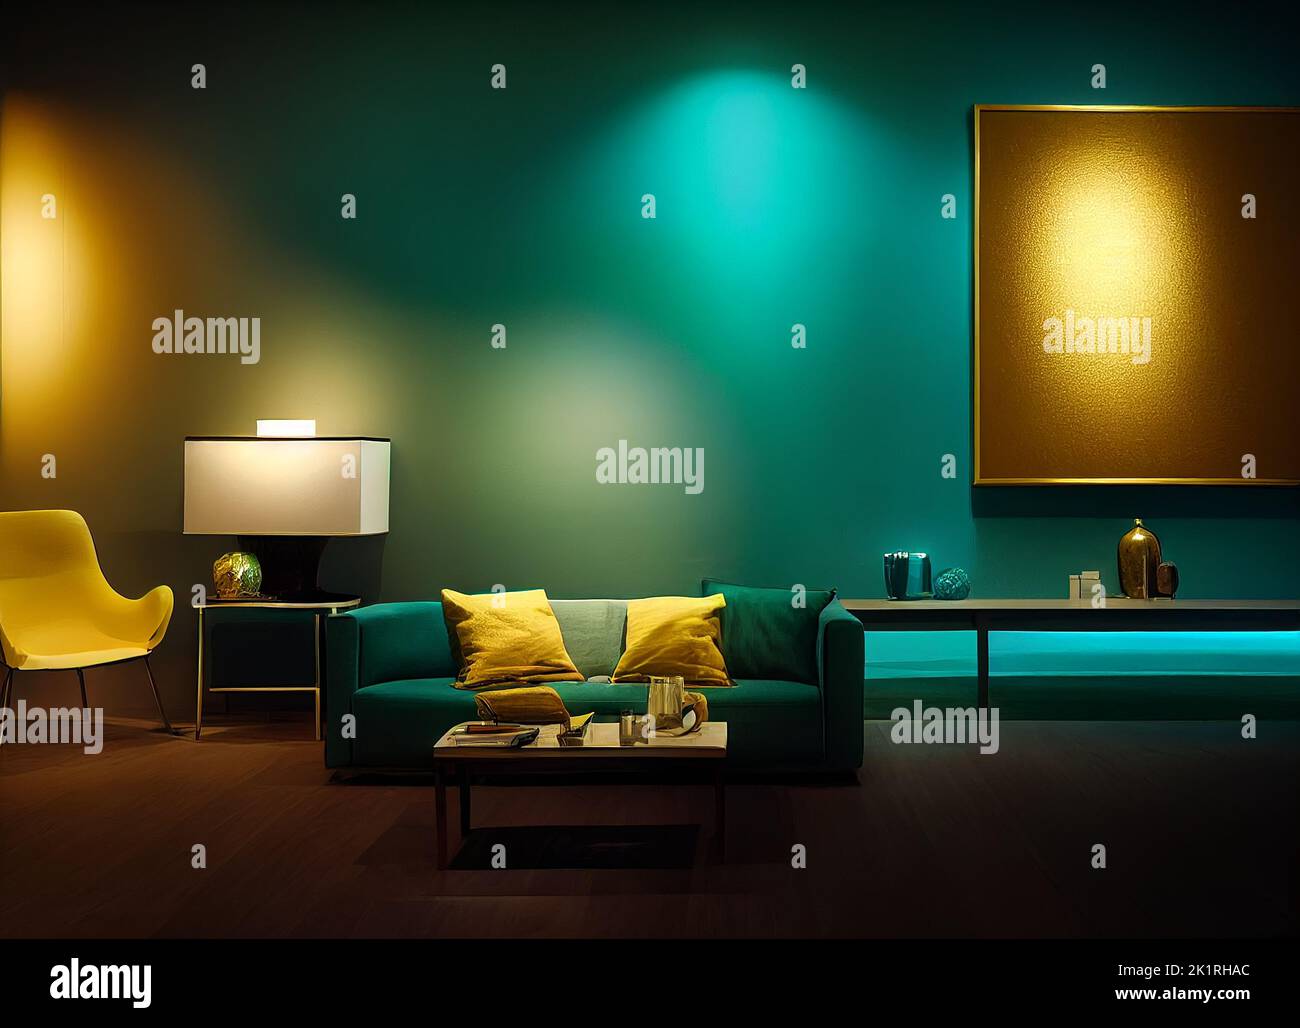 Simple and Luxury Interior in teal and golden style - Digital Generate Image Stock Photo